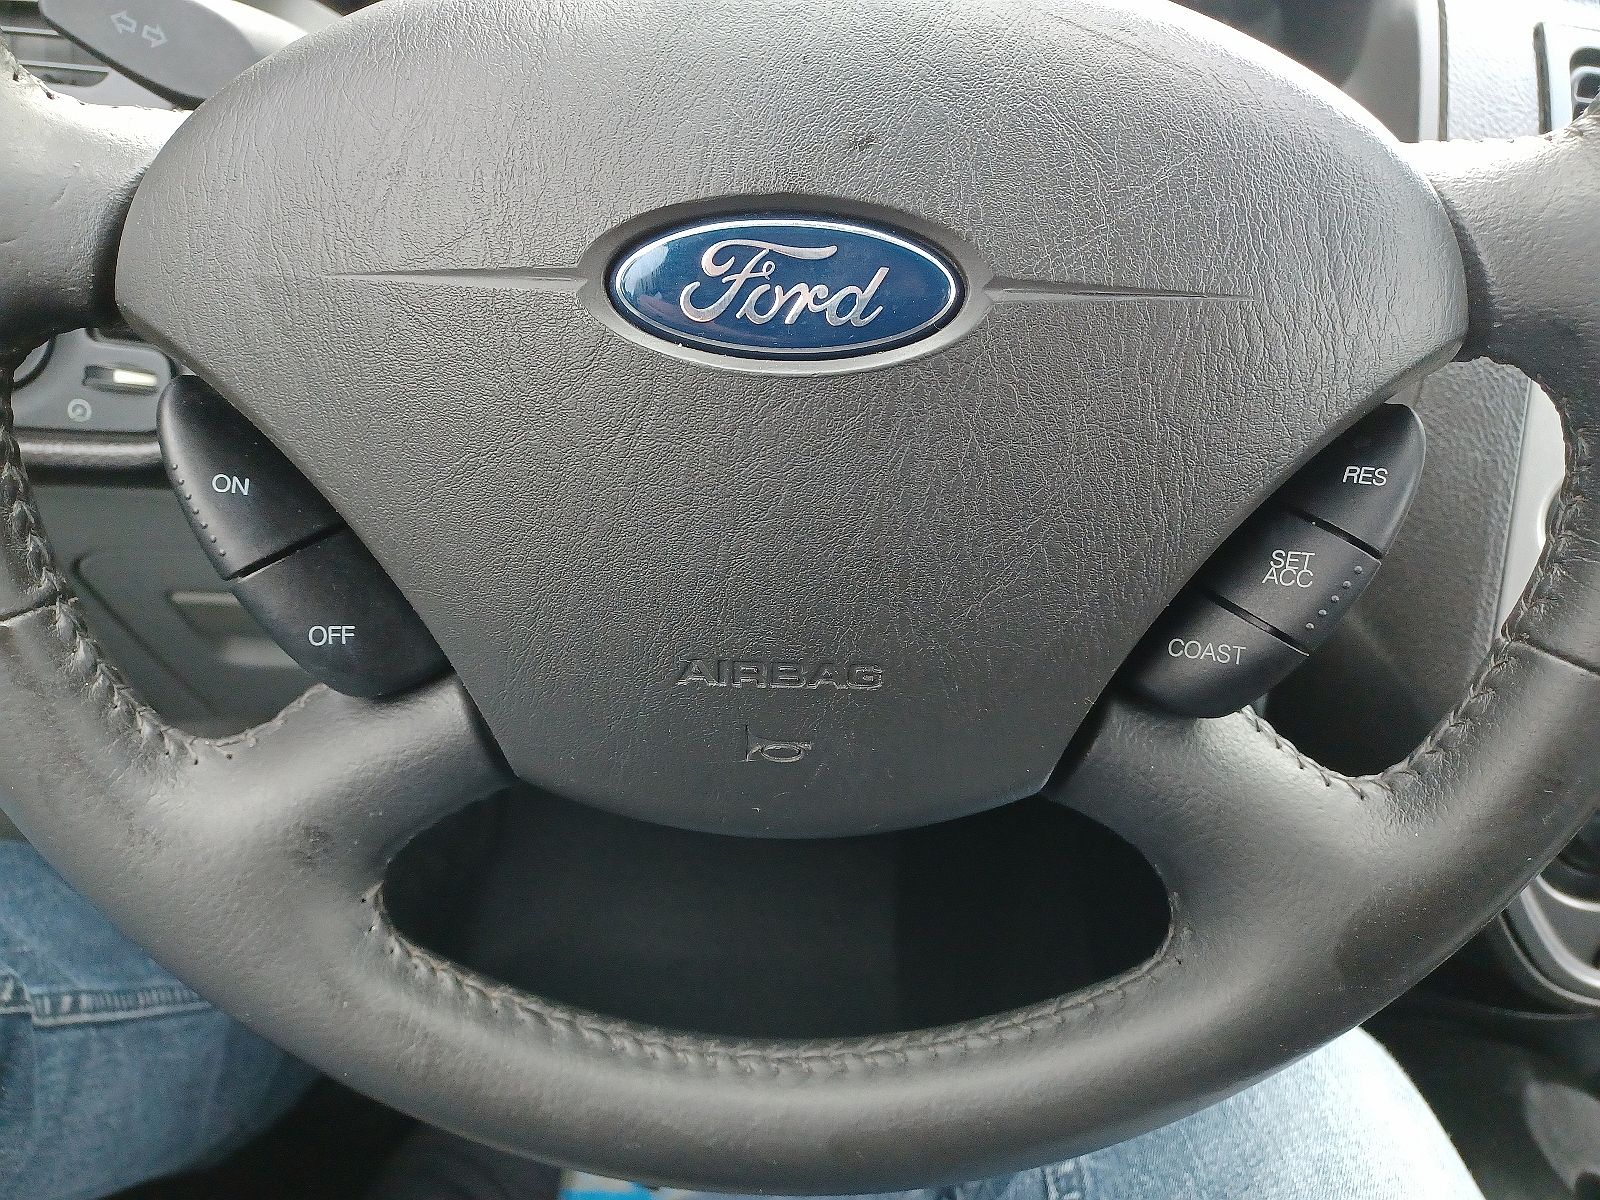 2006 Ford Focus S image 31